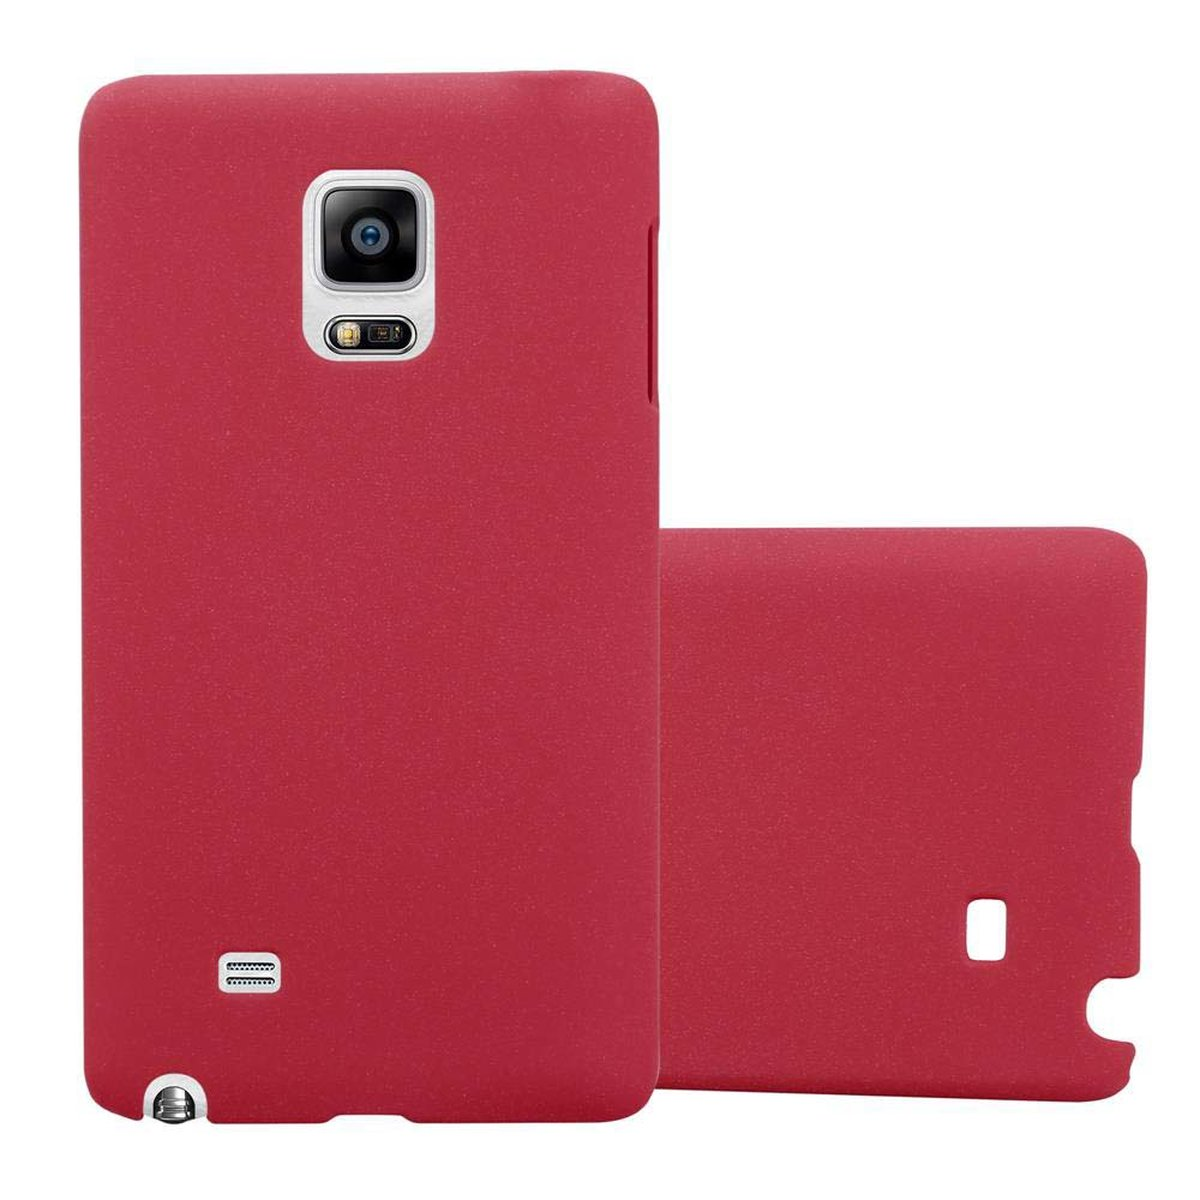 Backcover, Style, FROSTY Hard ROT Galaxy EDGE, Hülle NOTE Frosty CADORABO im Samsung, Case